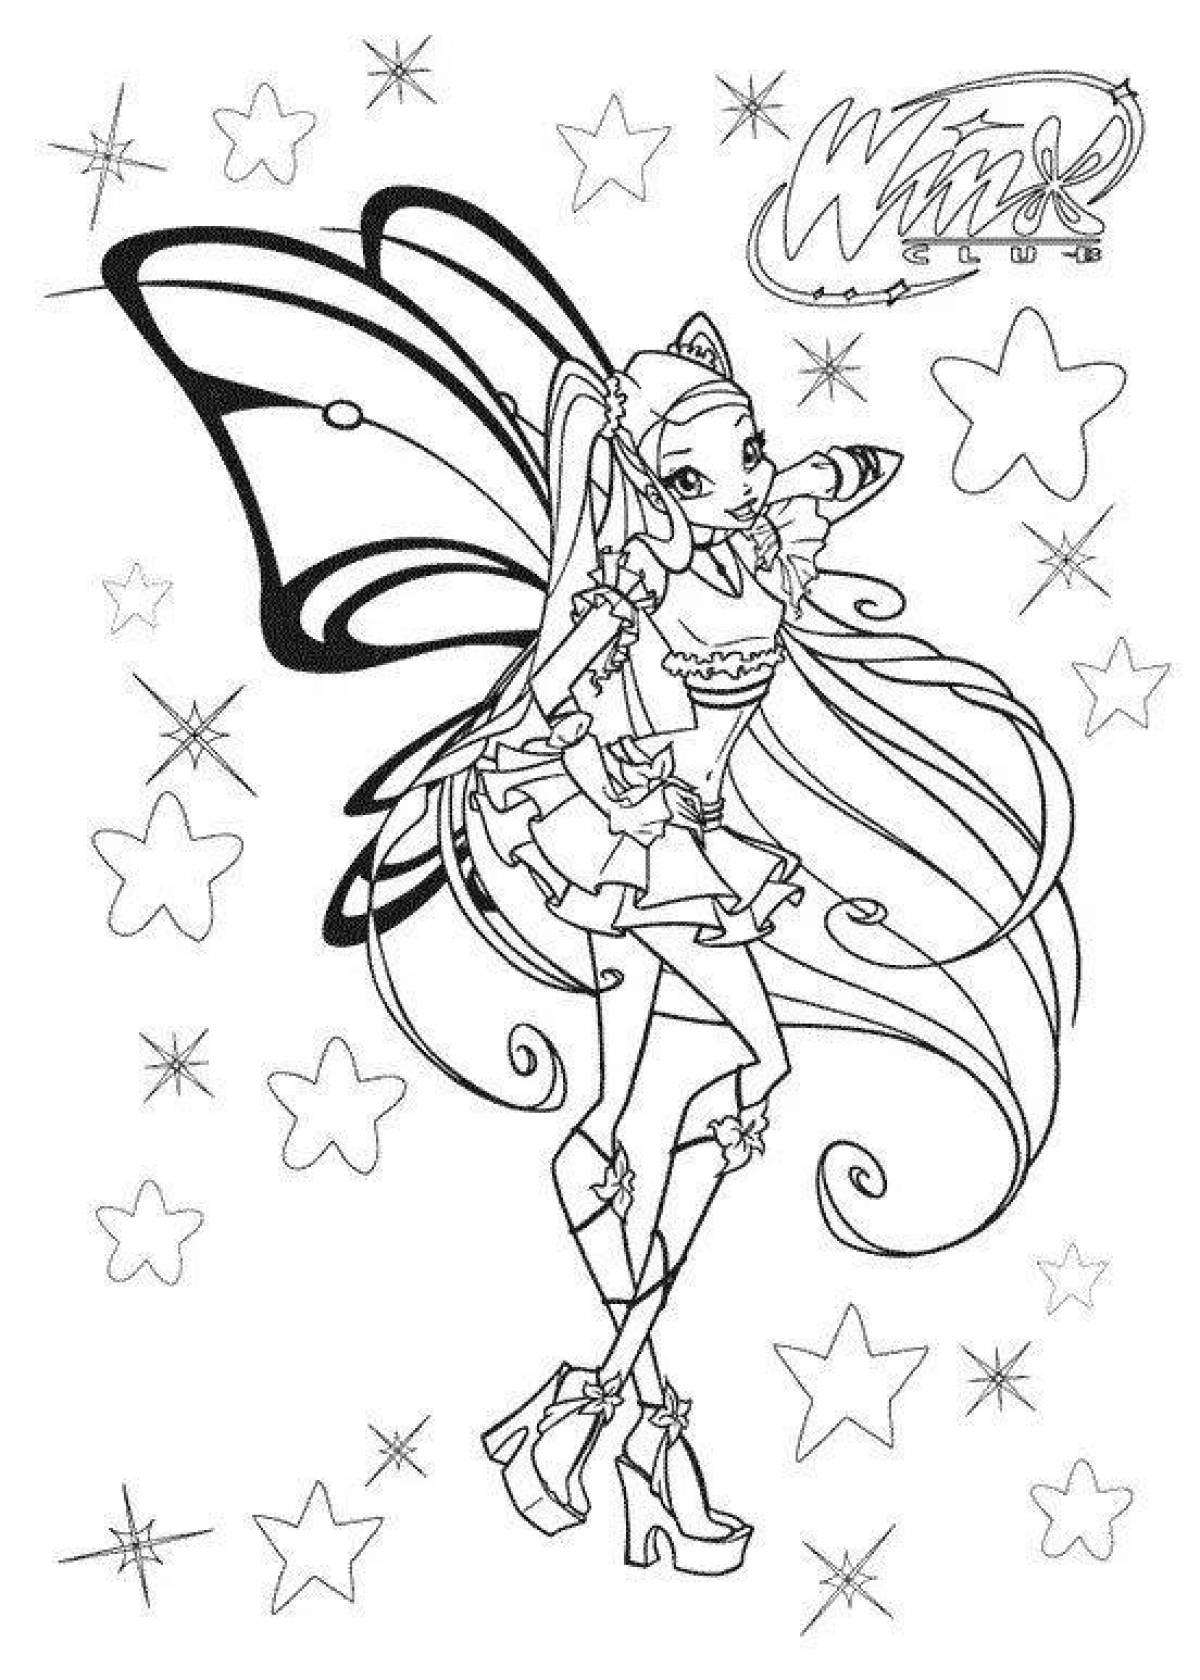 Animated stella winx coloring page